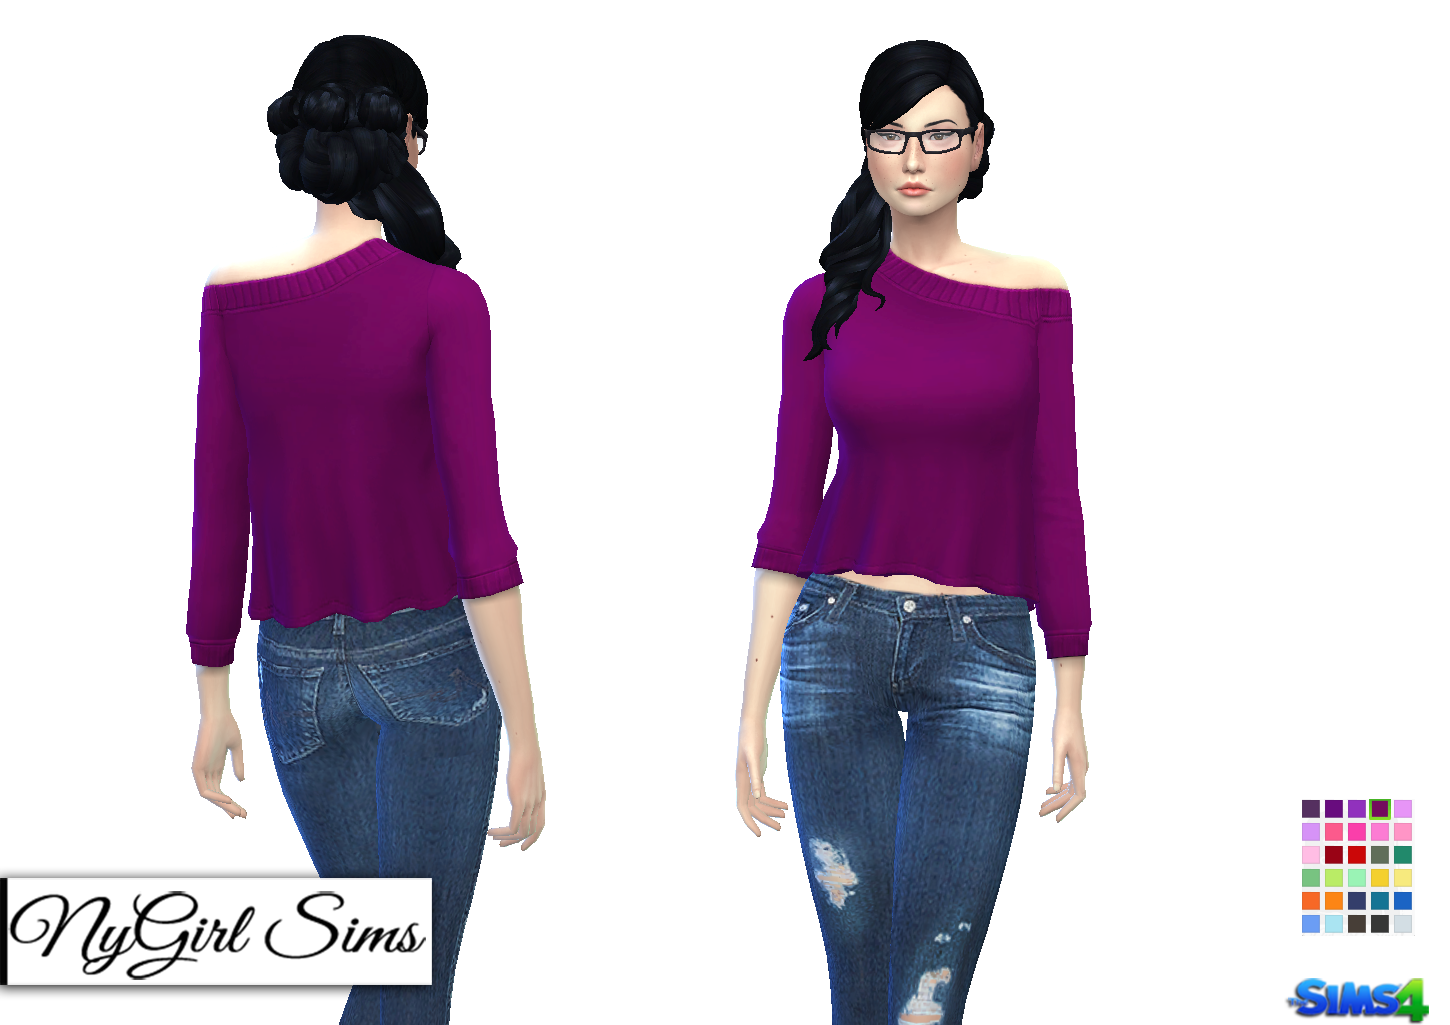 NyGirl Sims 4: Off Shoulder Flare Sweater Plain